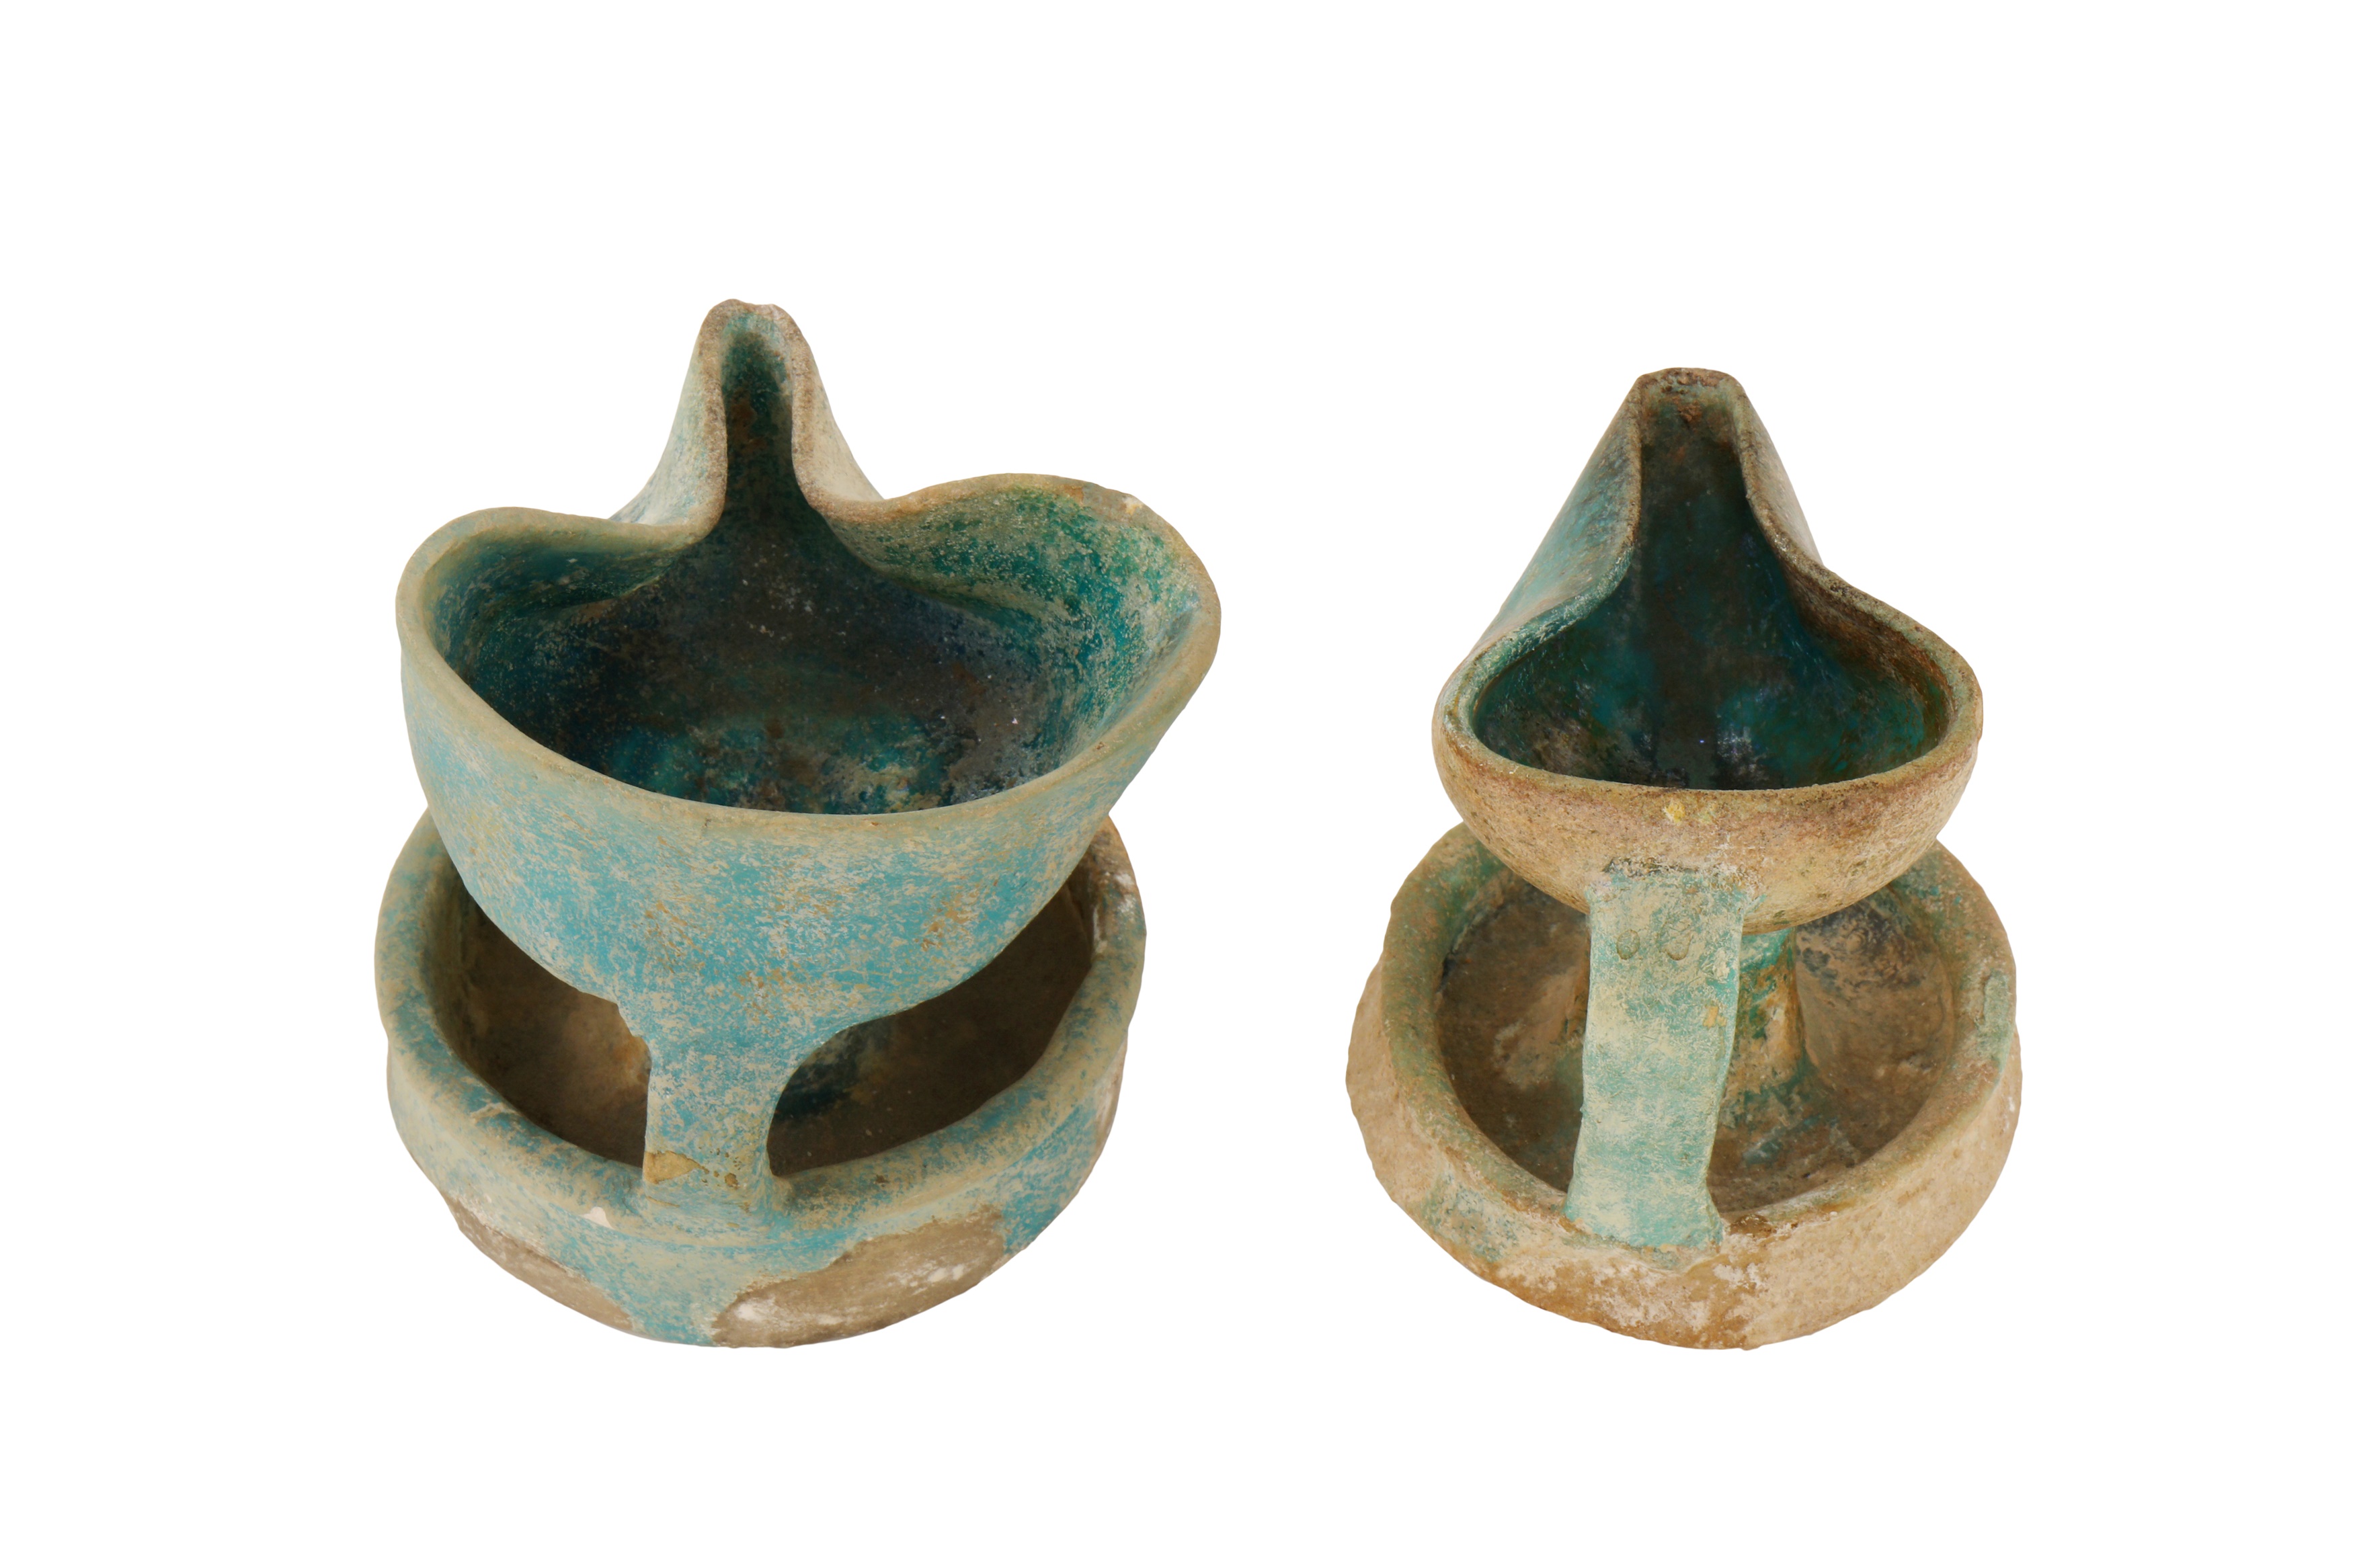 TWO 12TH-13TH CENTURY ANDALUSIAN SPANISH ALMOHAD TURQUOISE GLAZED OIL LAMPS - Image 2 of 3